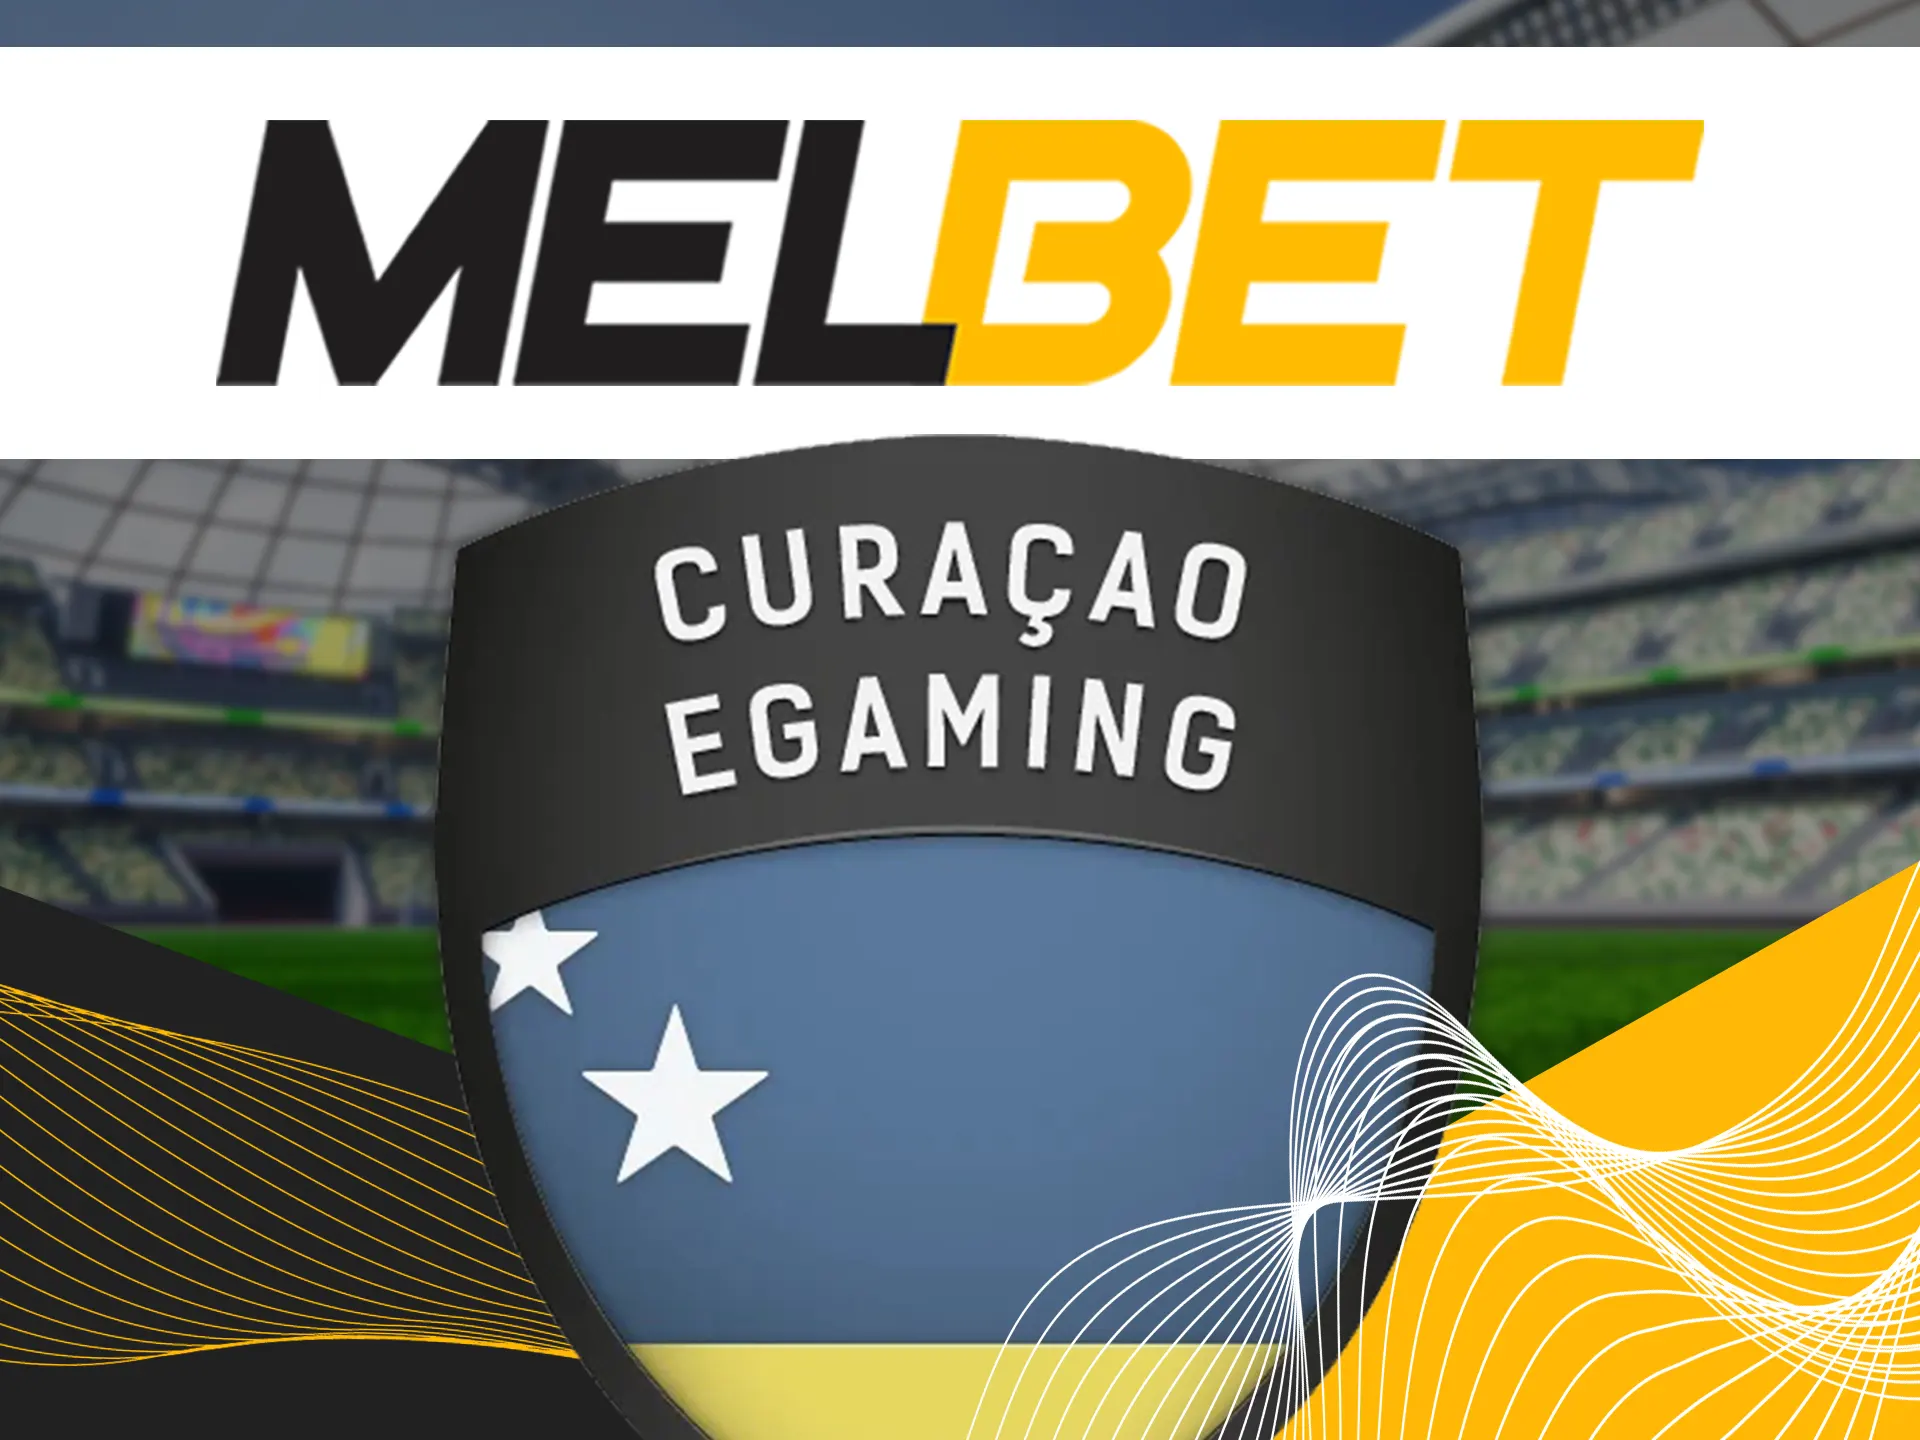 Melbet betting company has all of the reqired licenses.